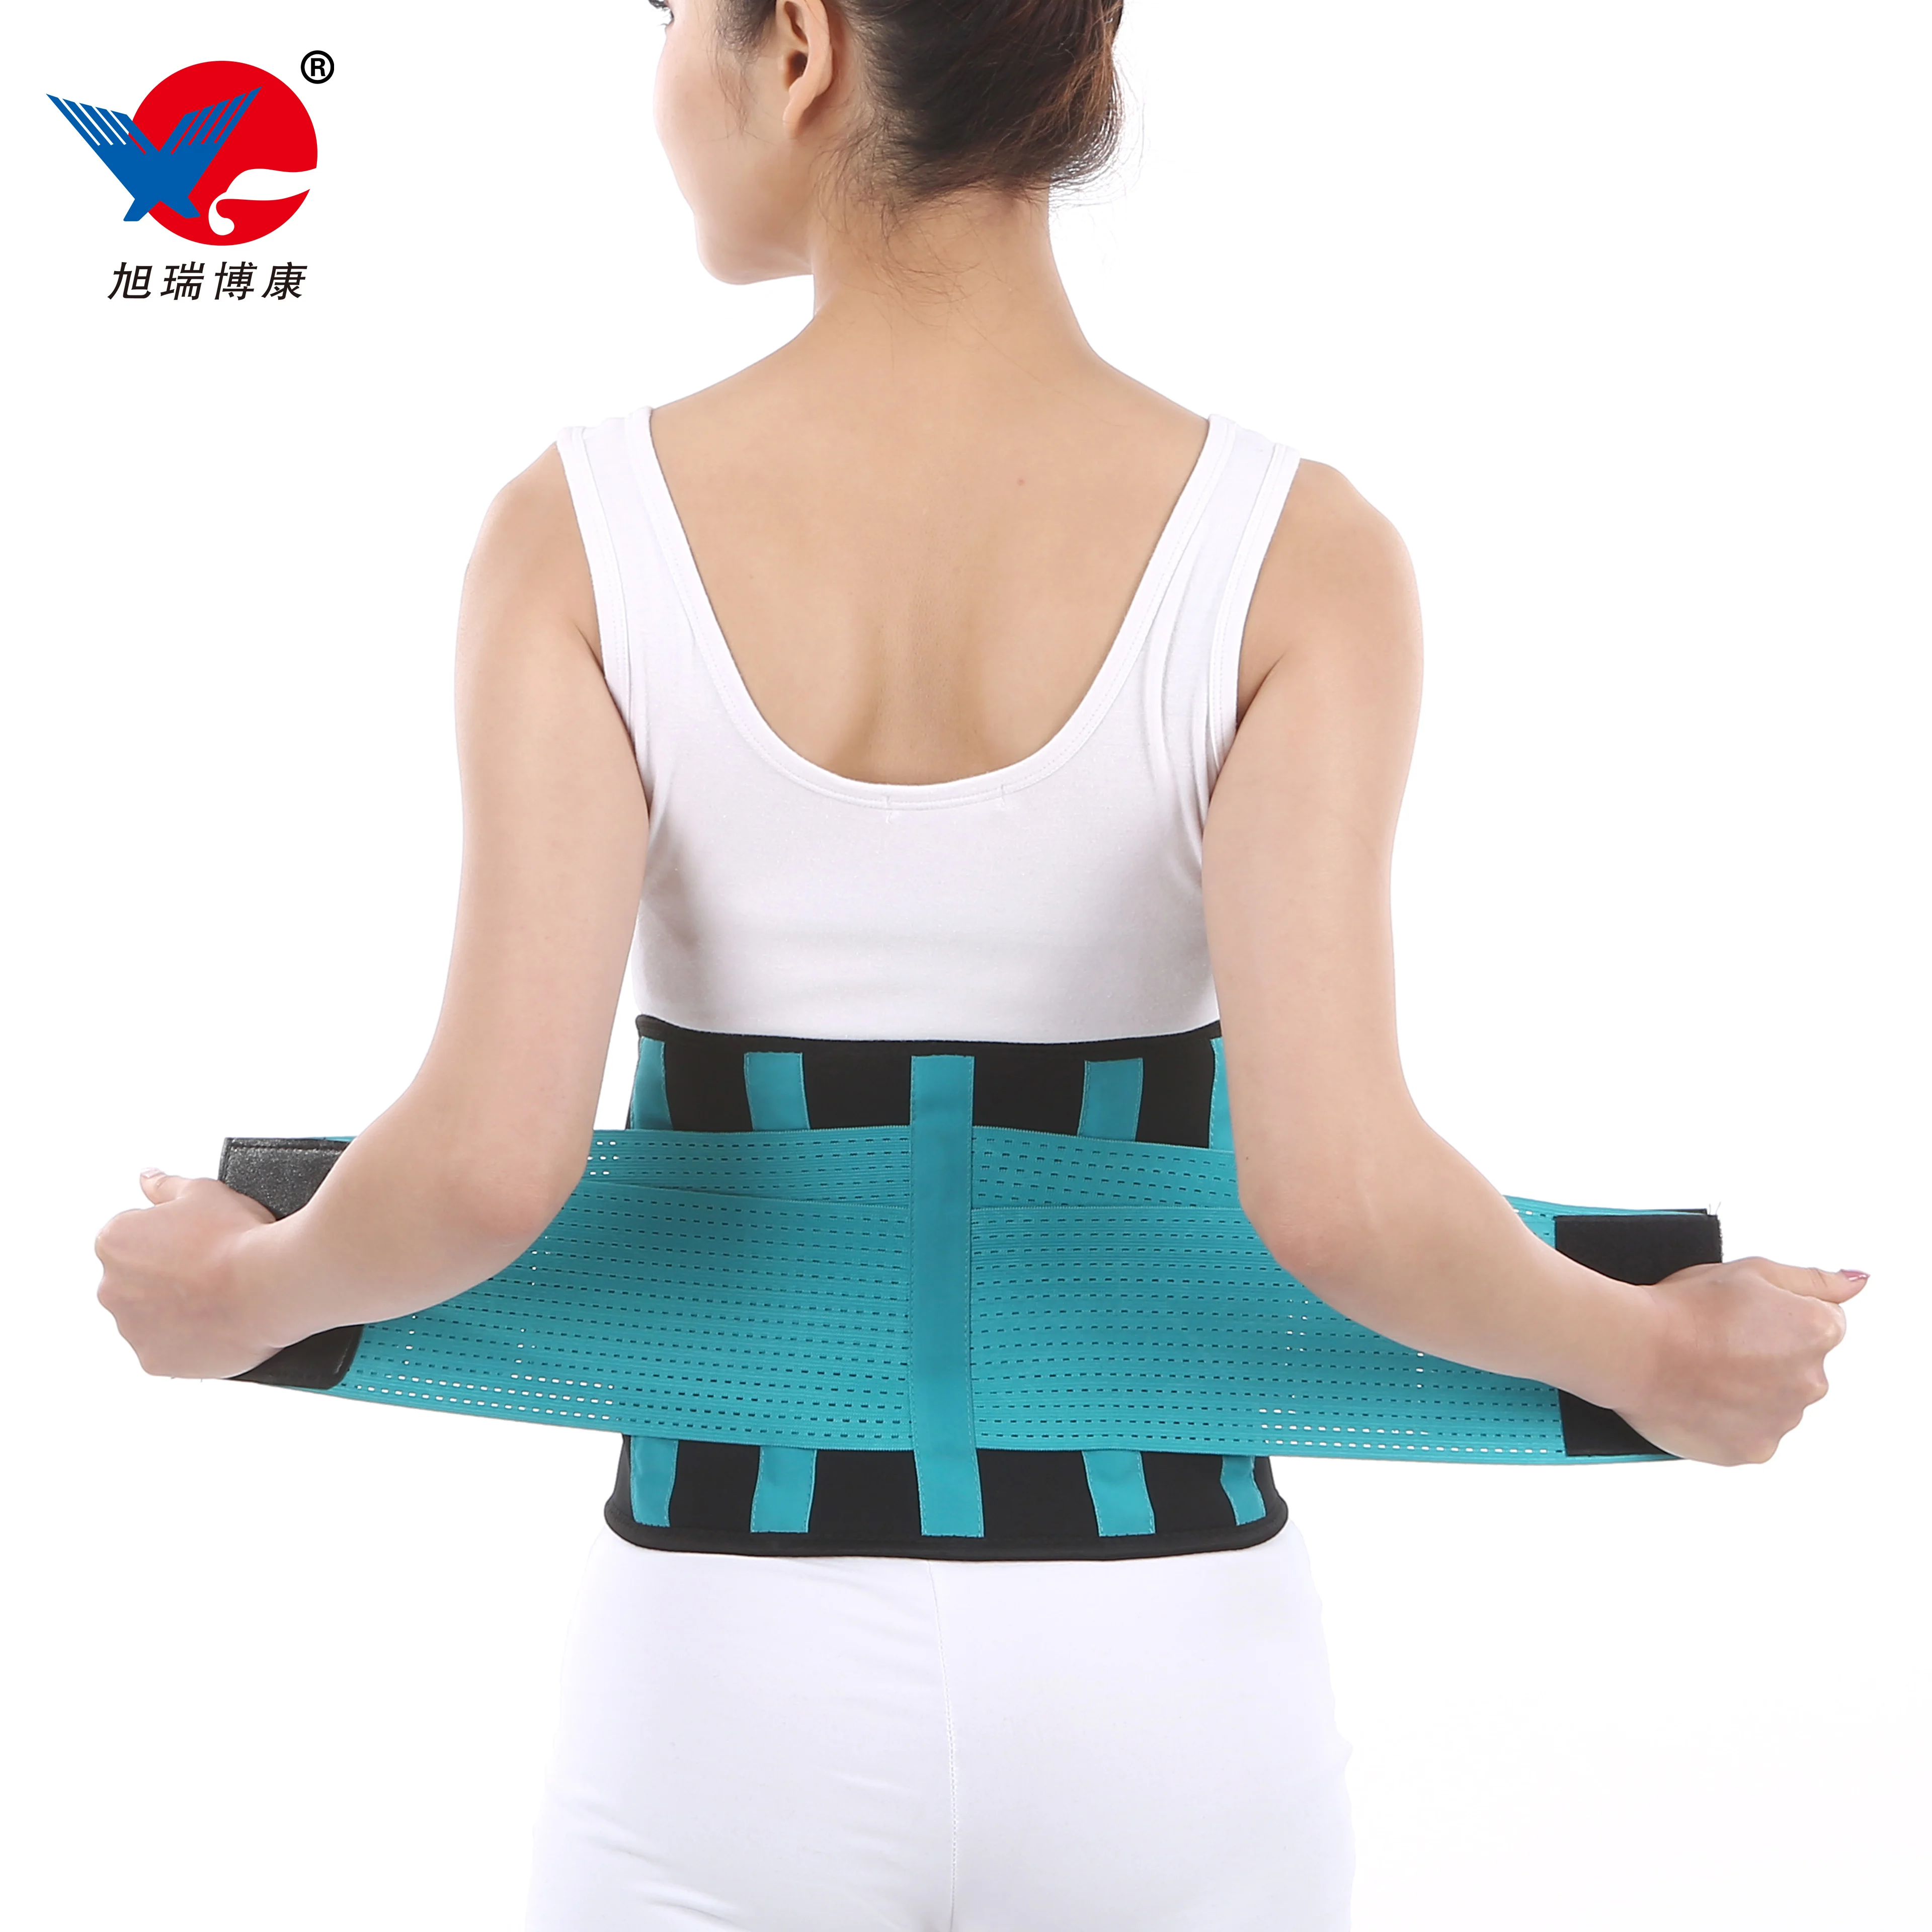 

CE approved Adjustable Elastic Double Pull Working lumbar belt relieve pain back brace waist support, Black yellow red